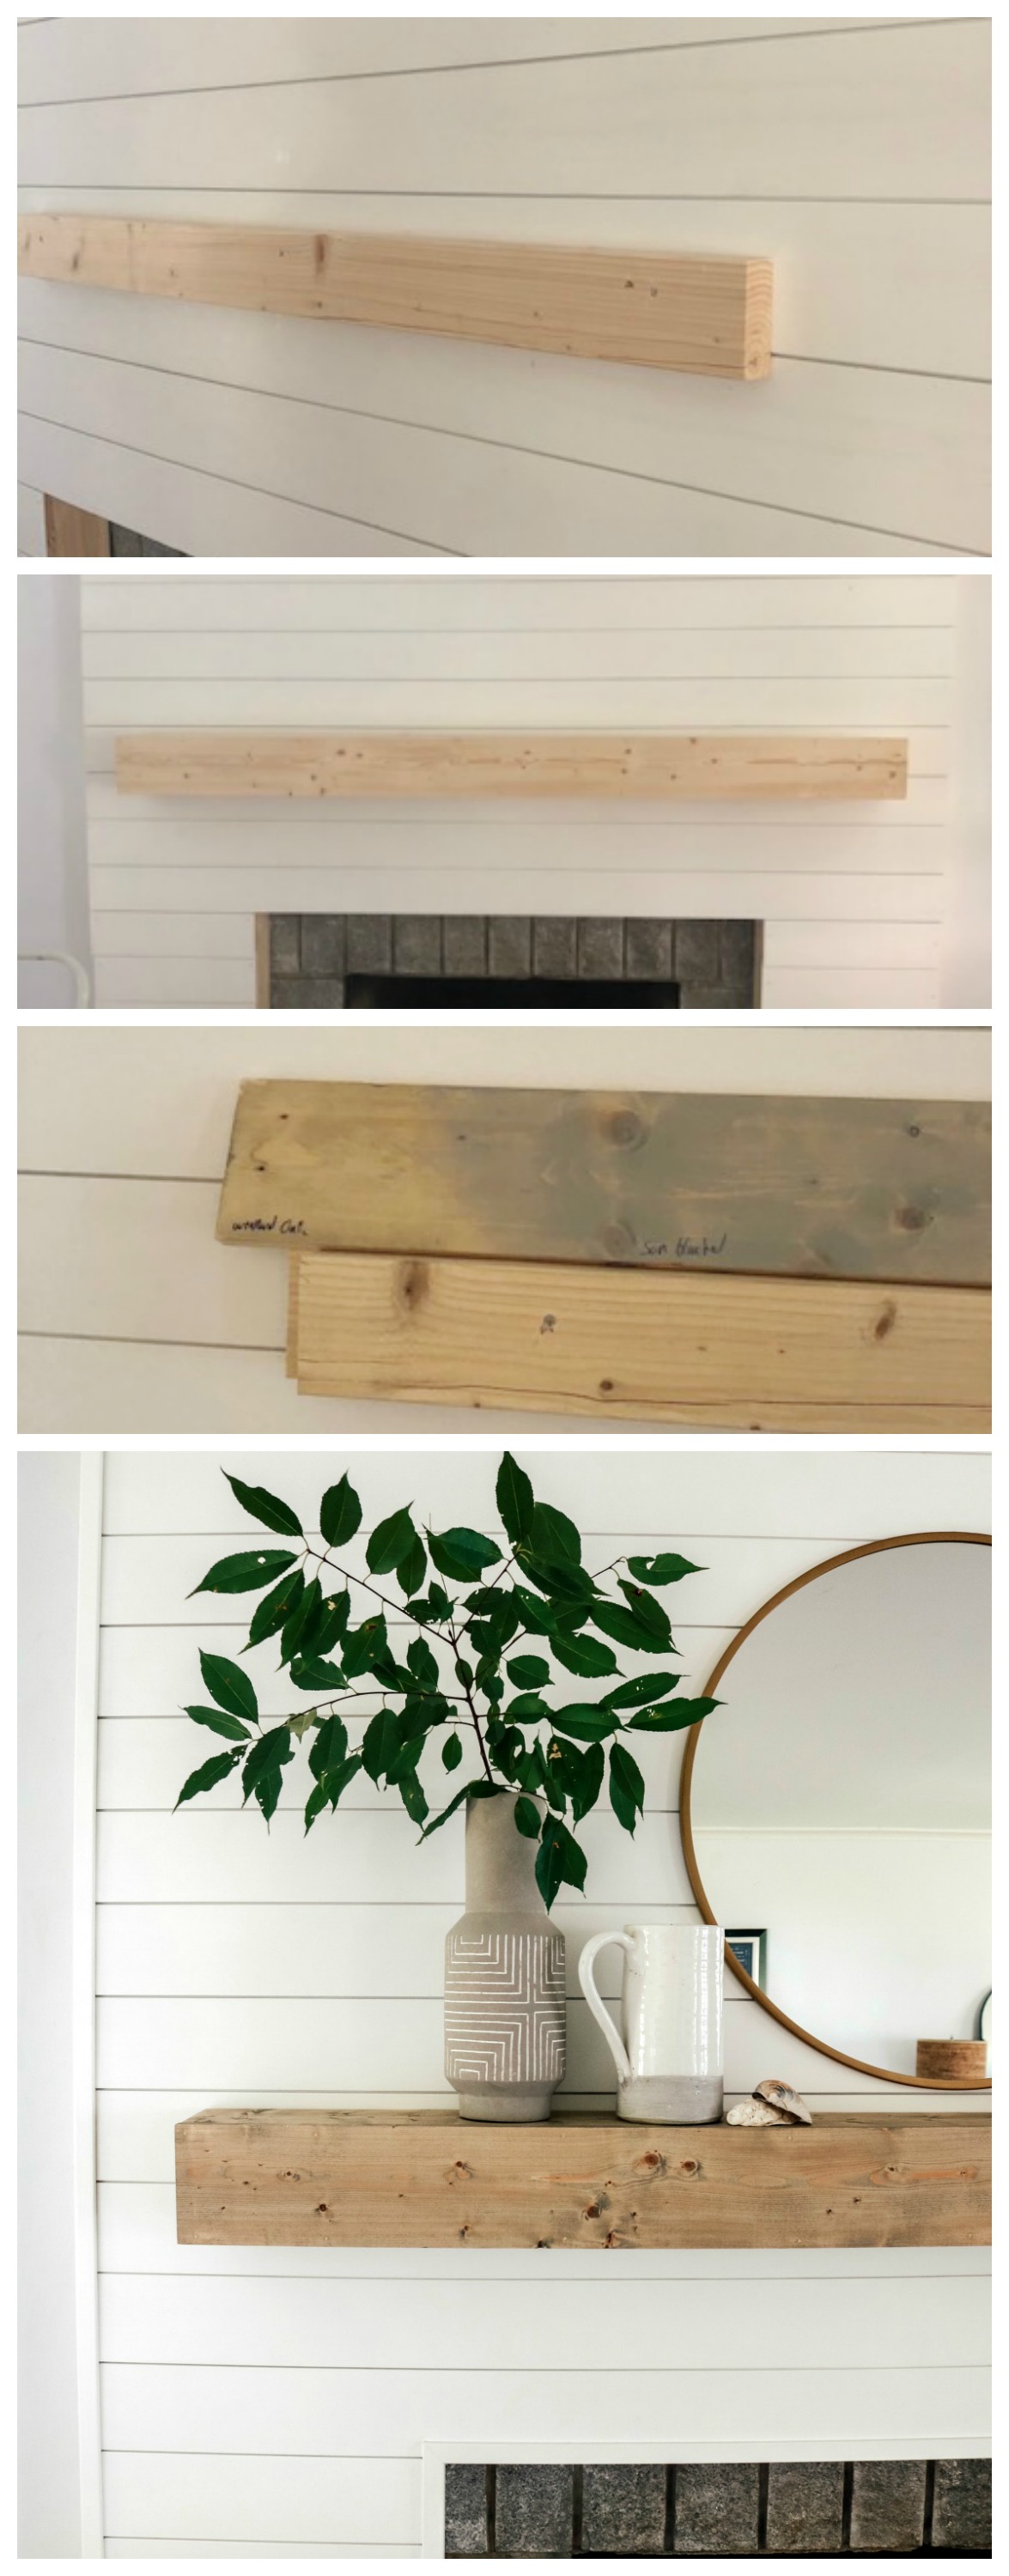 Adding A Fireplace to An Interior Wall Inspirational Shiplap Fireplace and Diy Mantle Ditched the Old